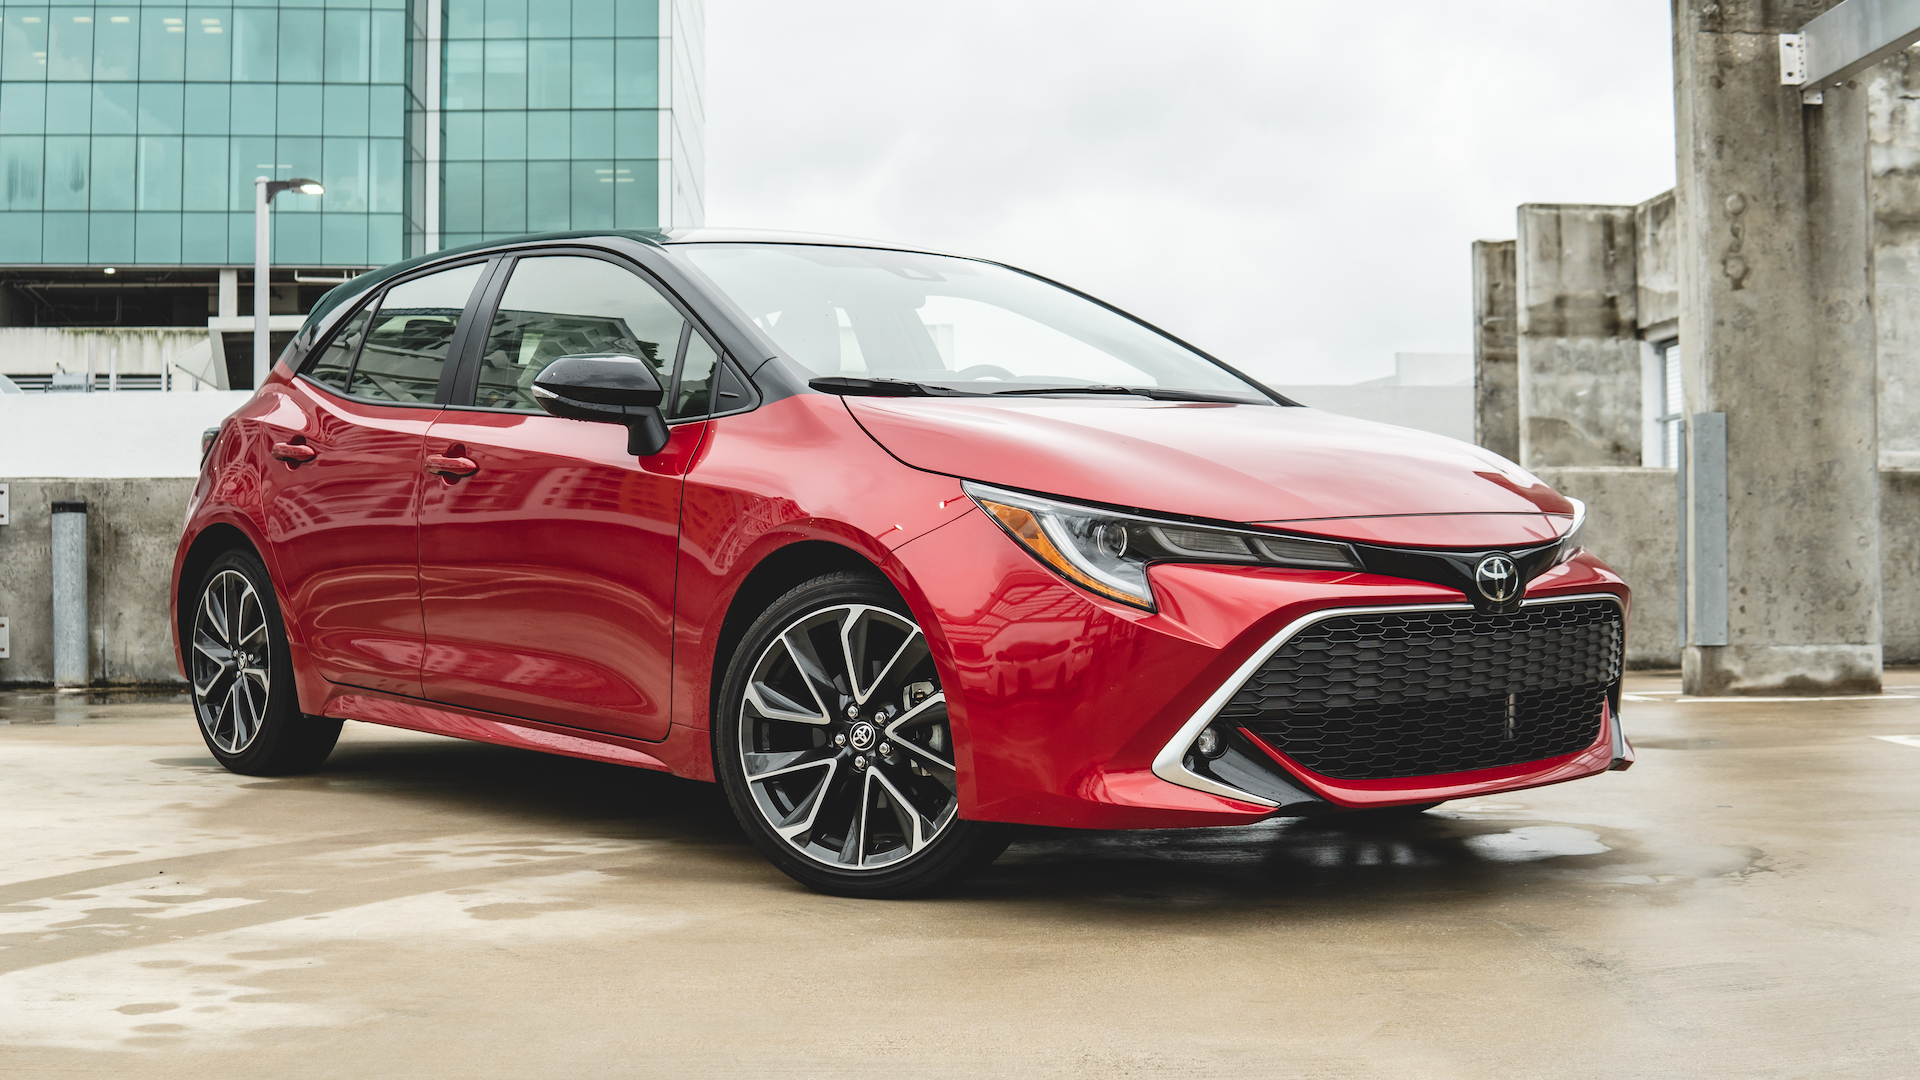 An image of a 2021 Toyota Corolla parked outdoors